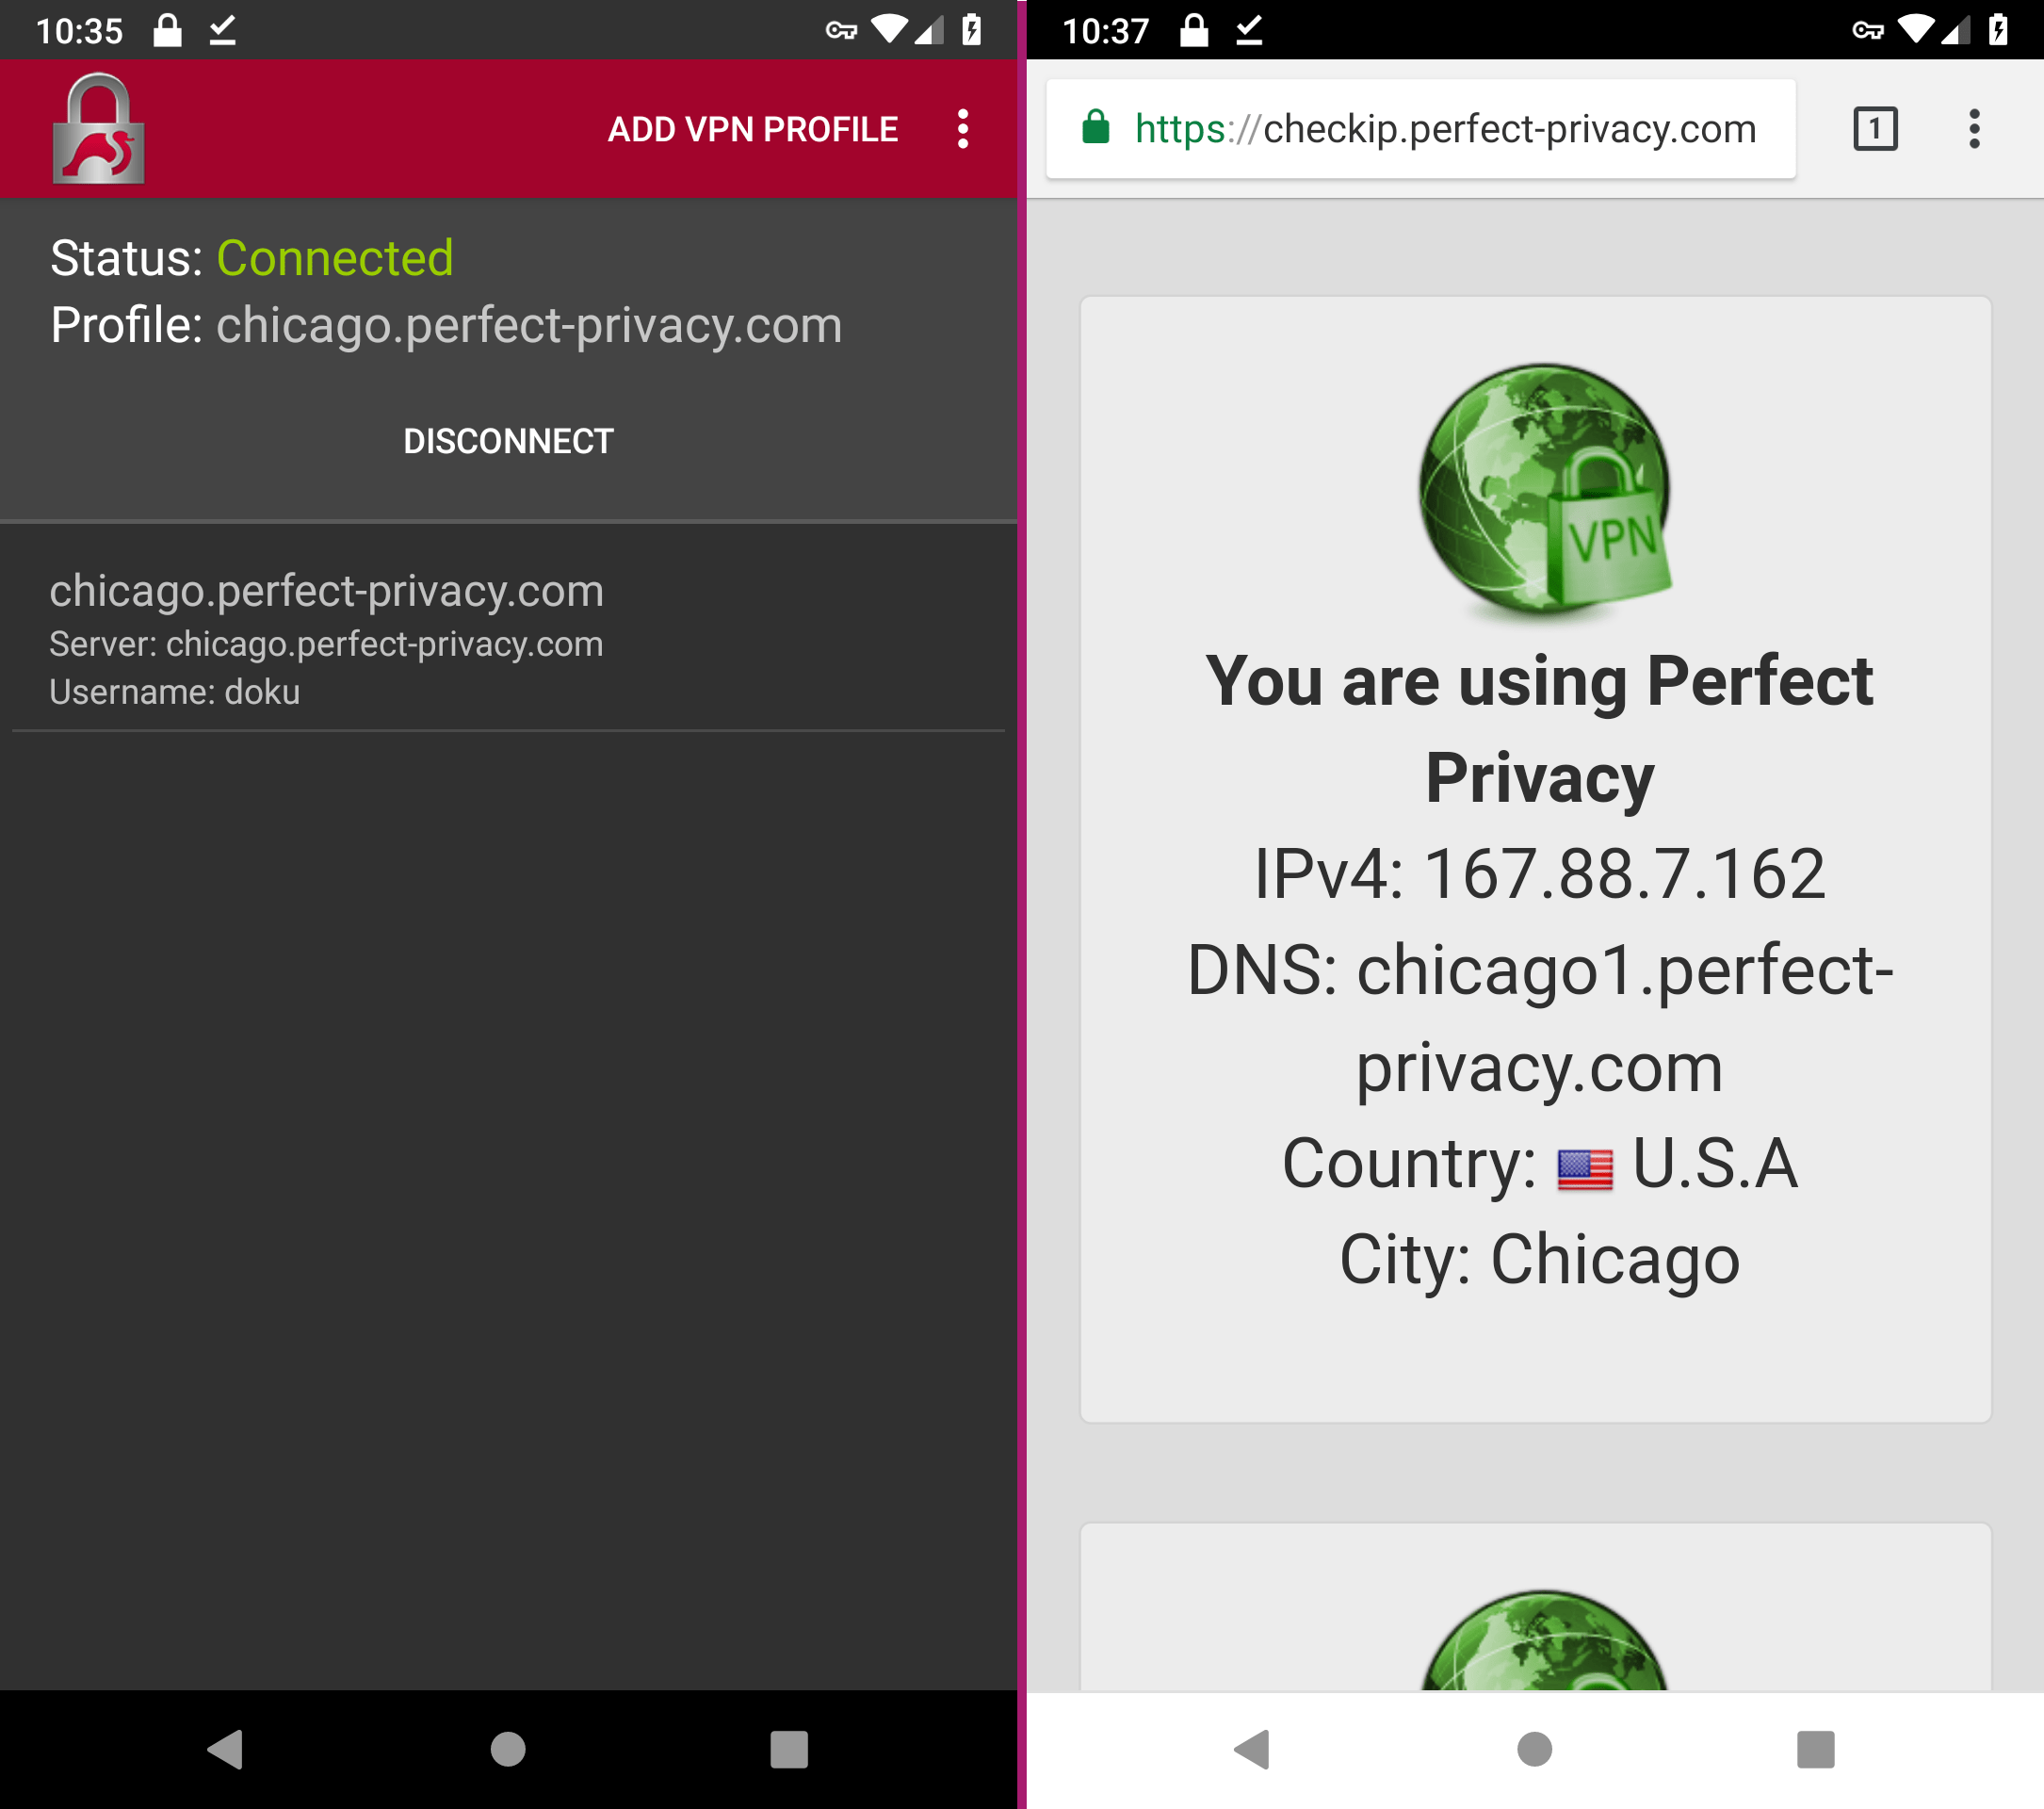 VPN connection established successfully | Set up strongSwan on Android (IPsec/IKEv2)